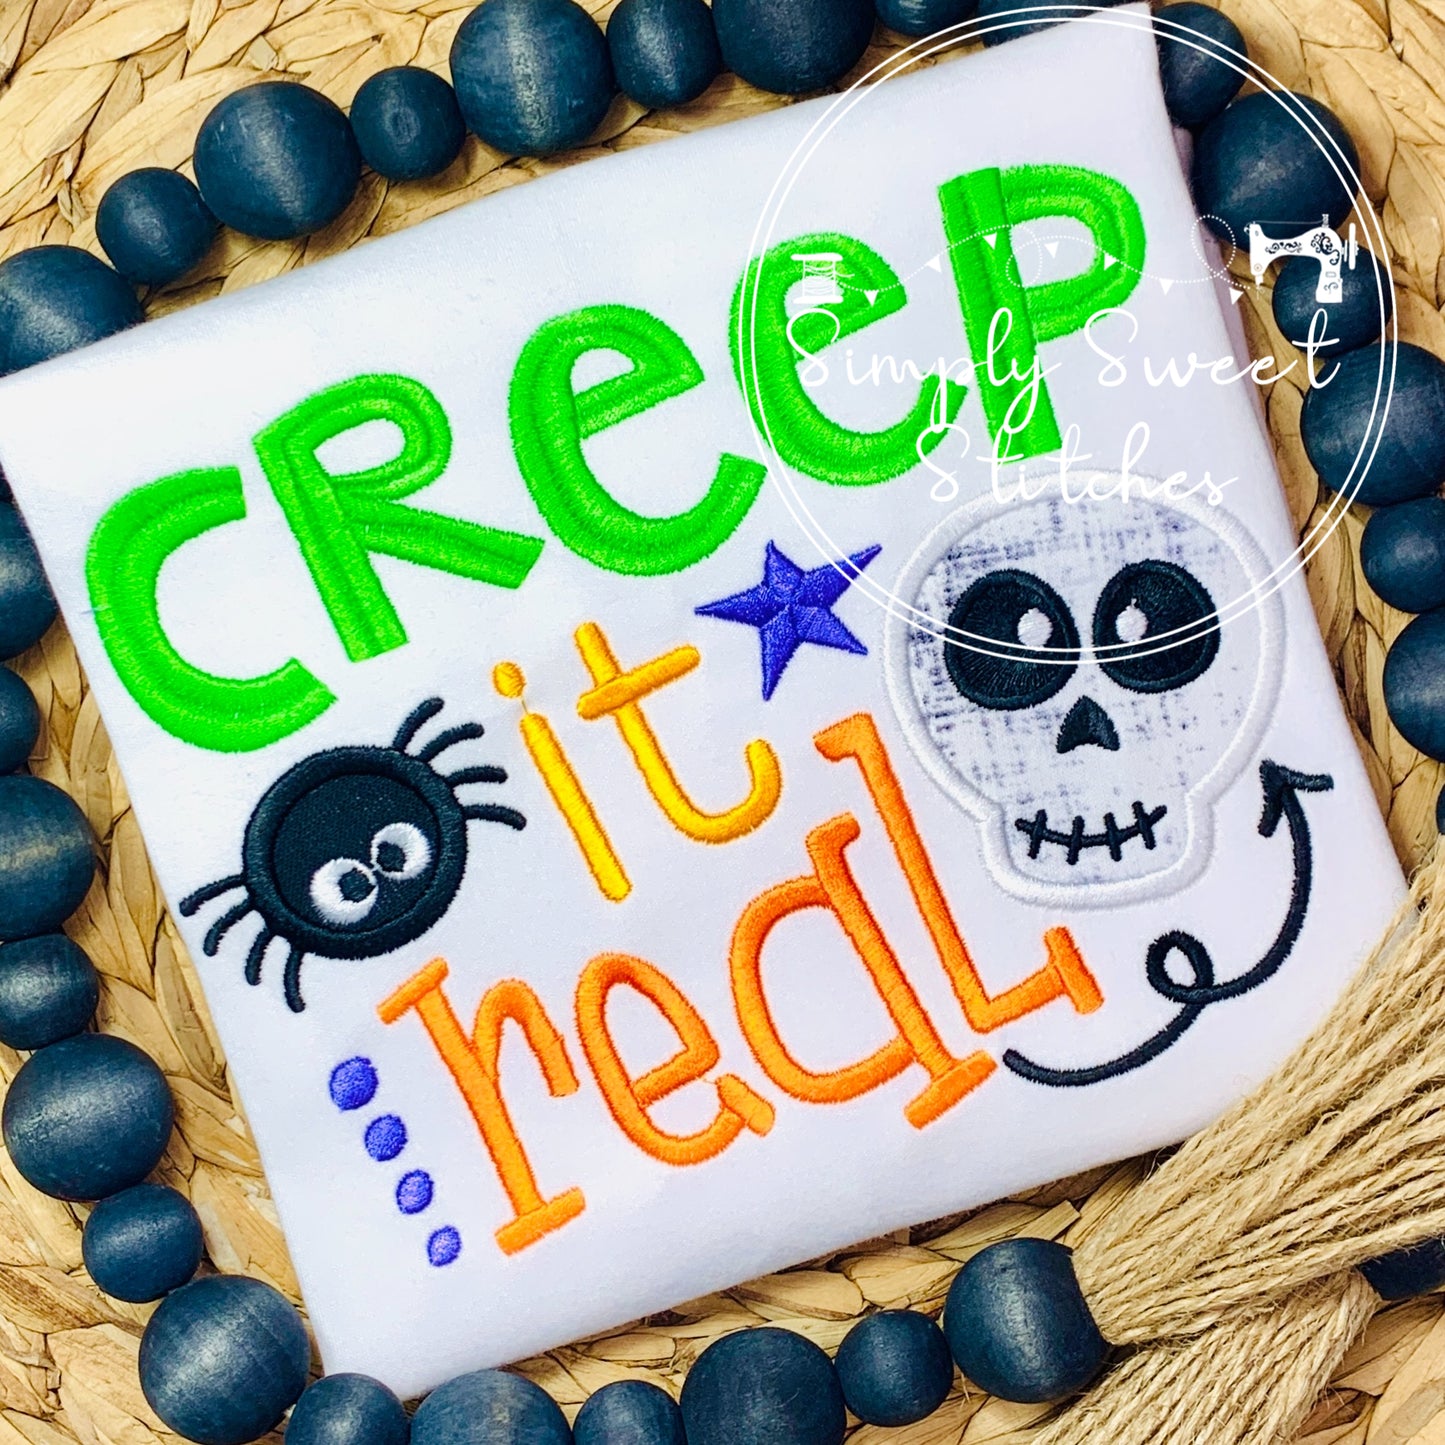 2371 - CREEP IT REAL - EMBROIDERY CHILD SHIRT